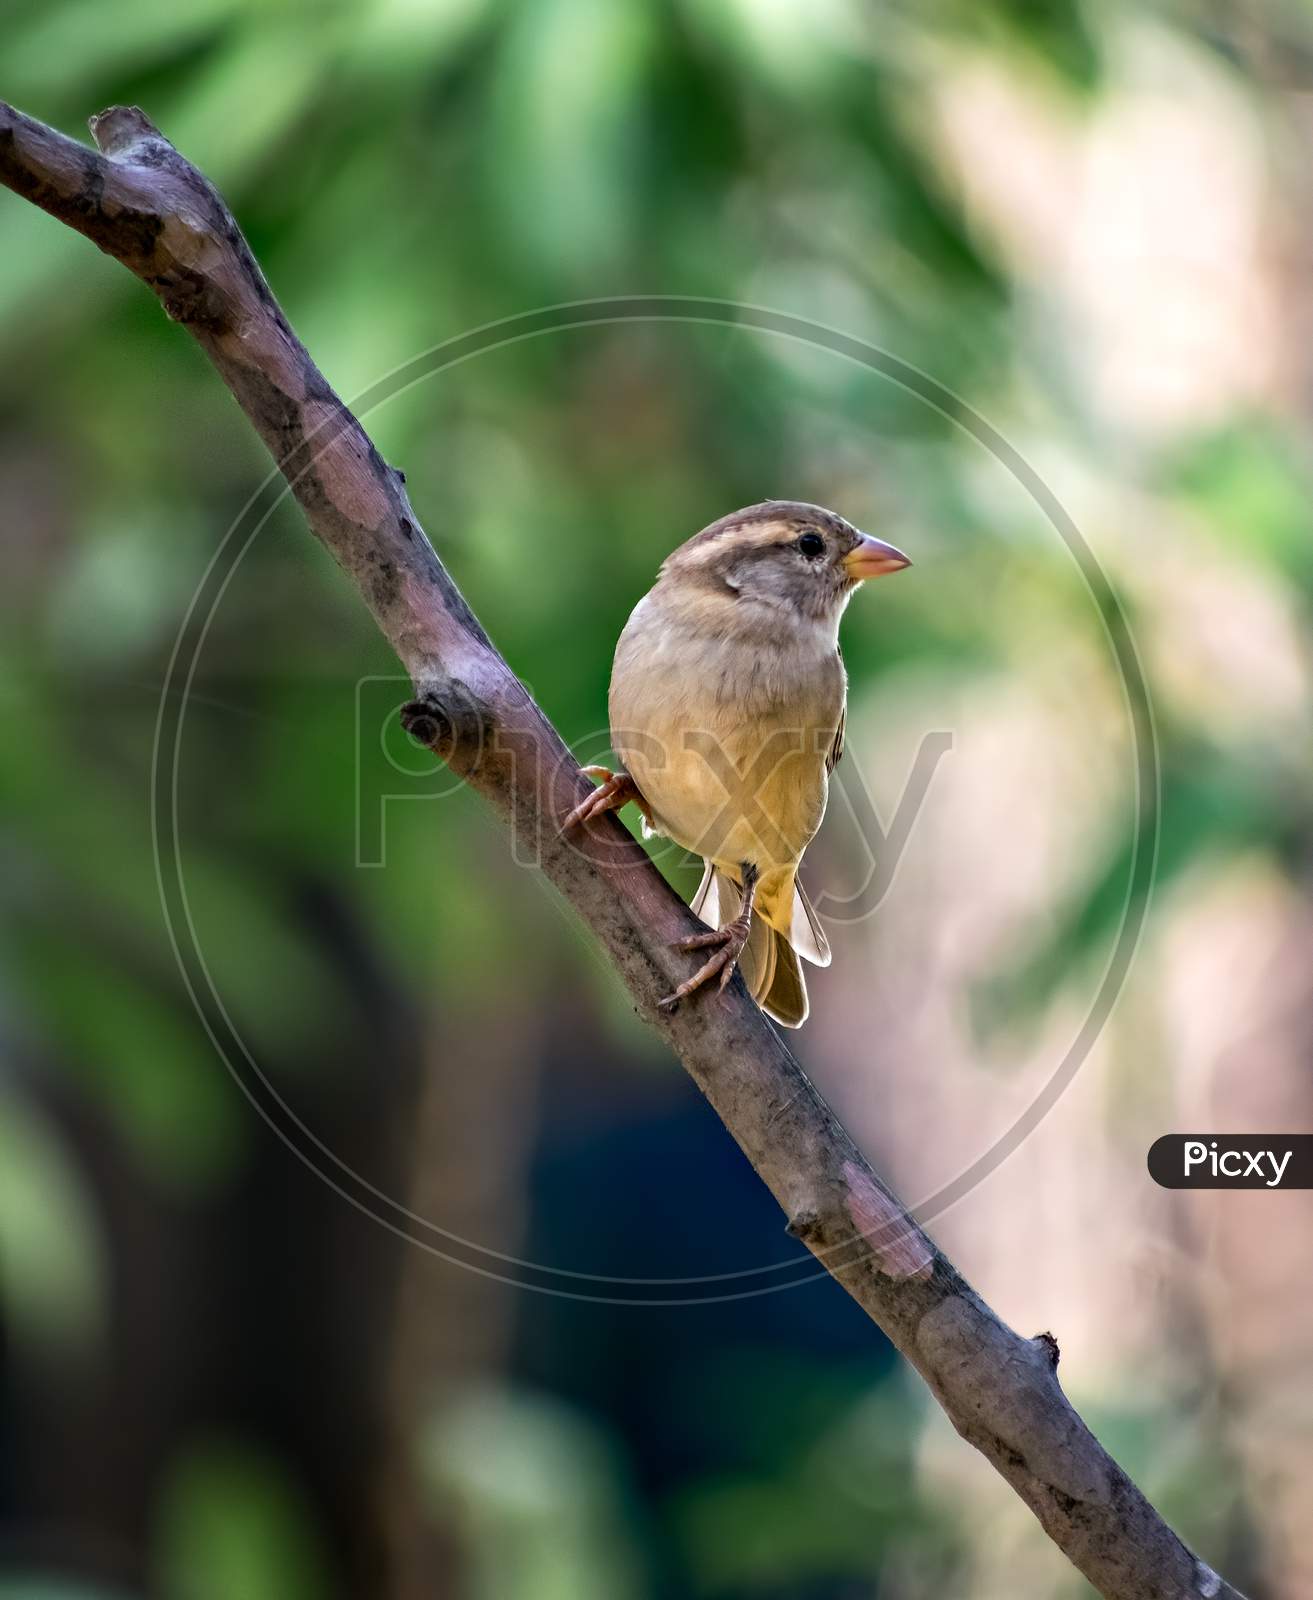 Isolated Image Of A Female Sparrow On Tree Branch With Clear Green Background.